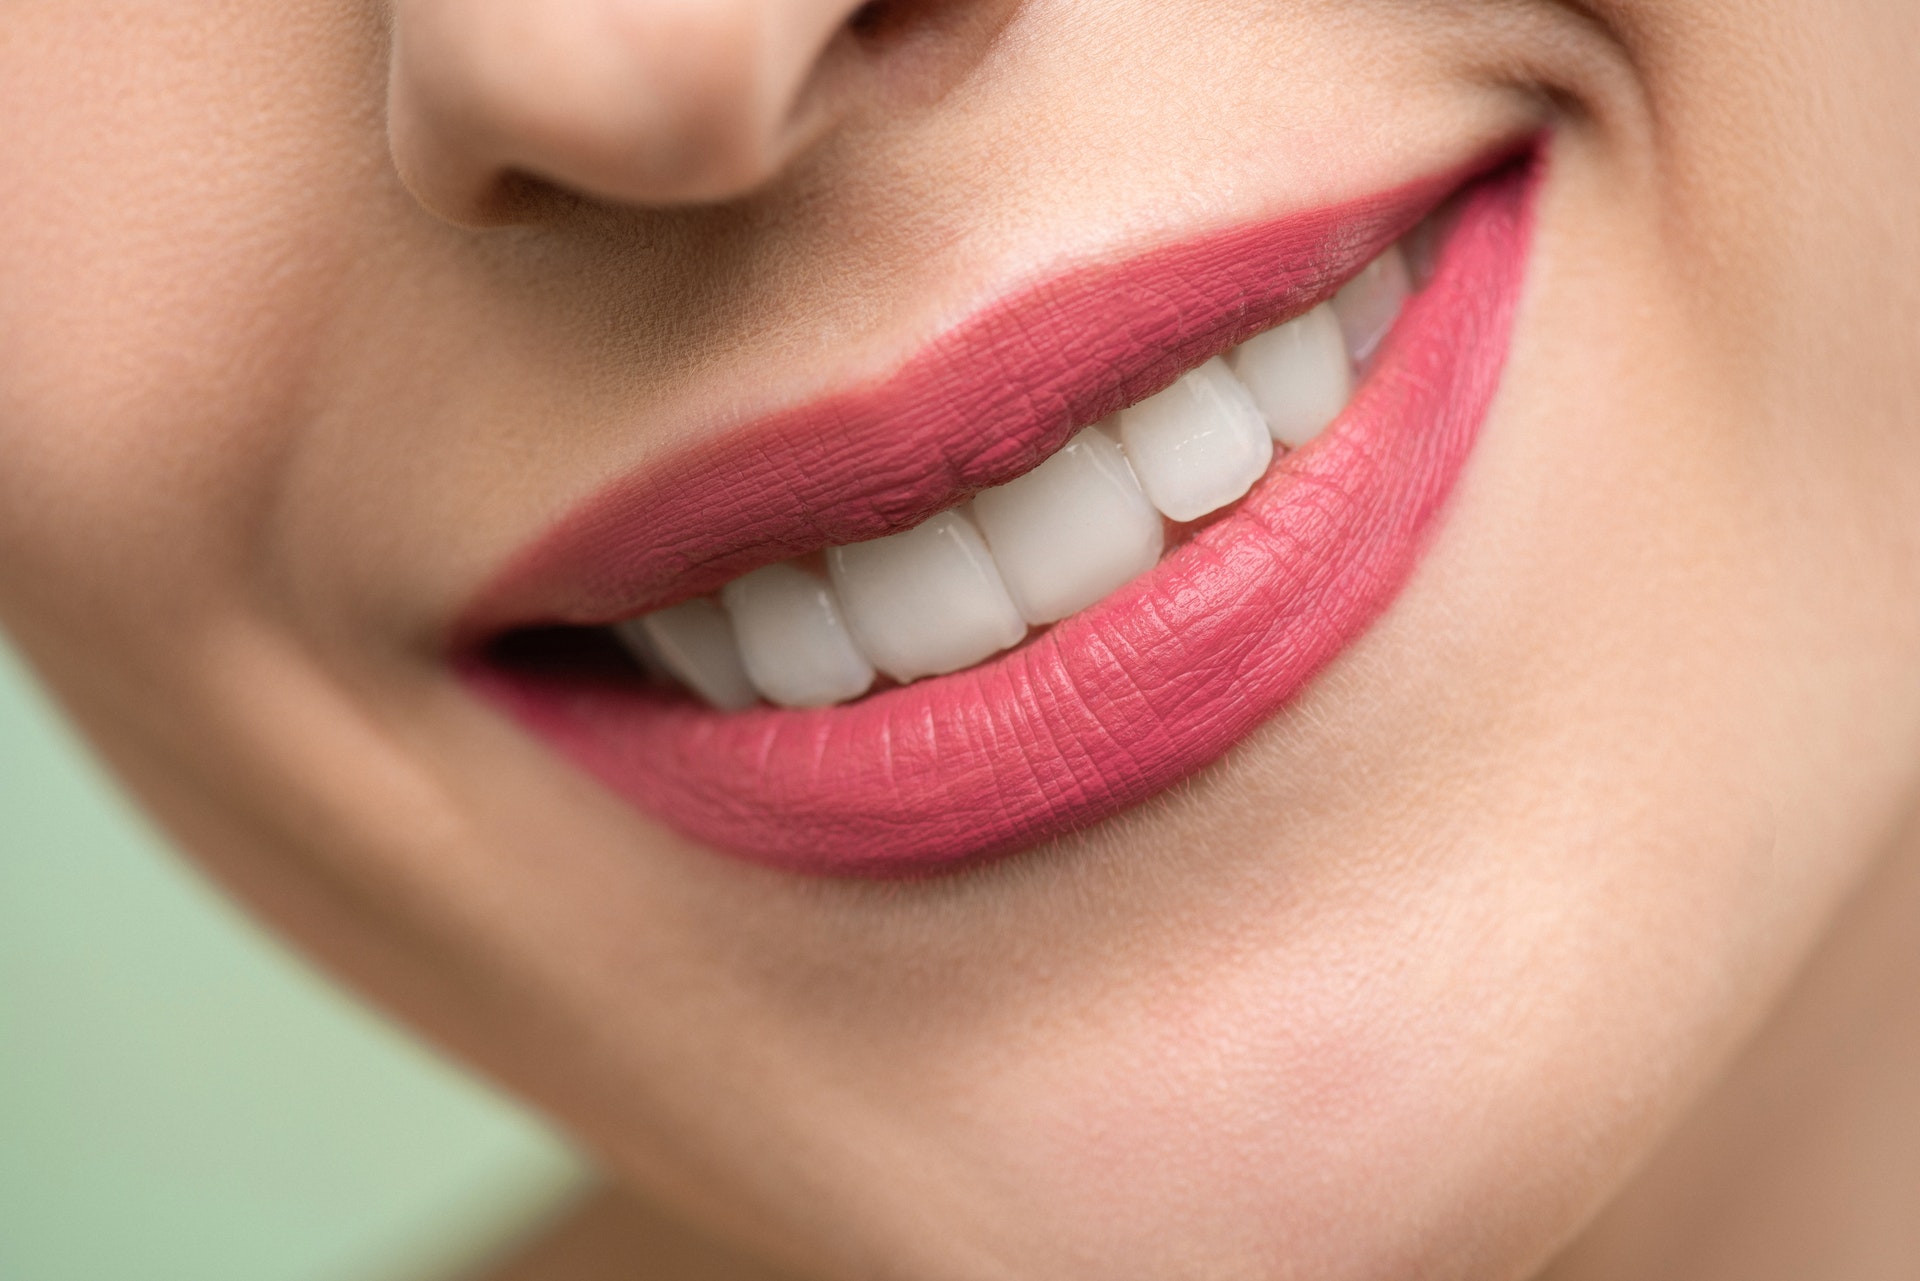 Is Whitening Your Teeth Worth It